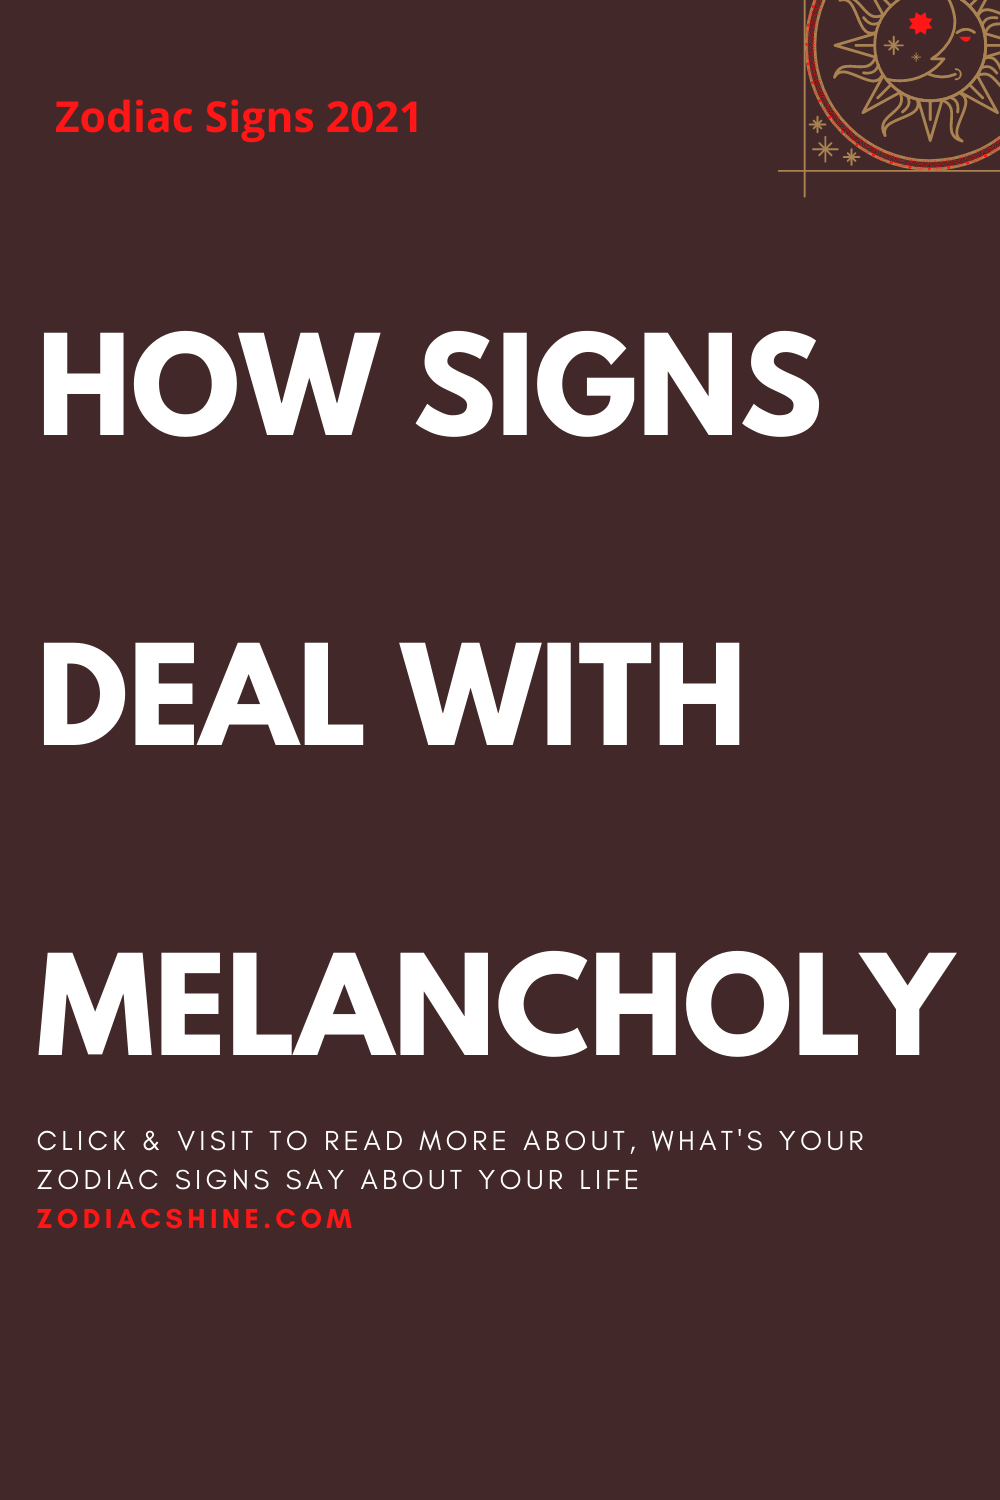 HOW SIGNS DEAL WITH MELANCHOLY